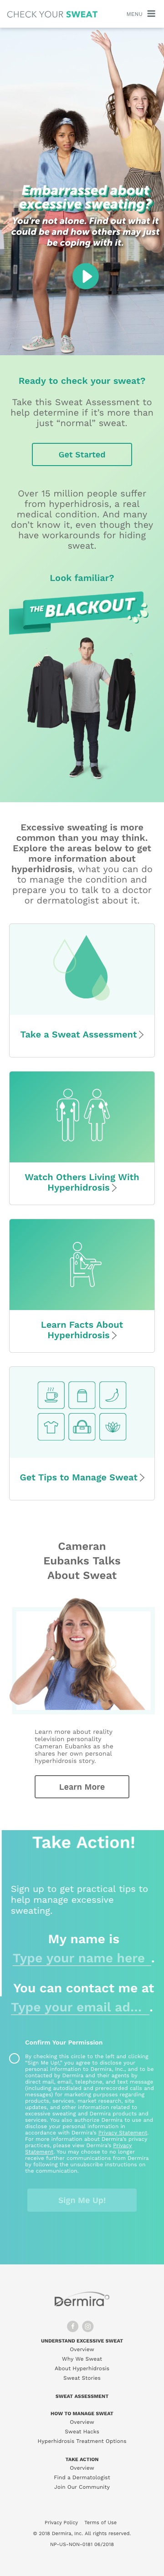 Disease Awareness Website with a Quiz - Homepage (Mobile)